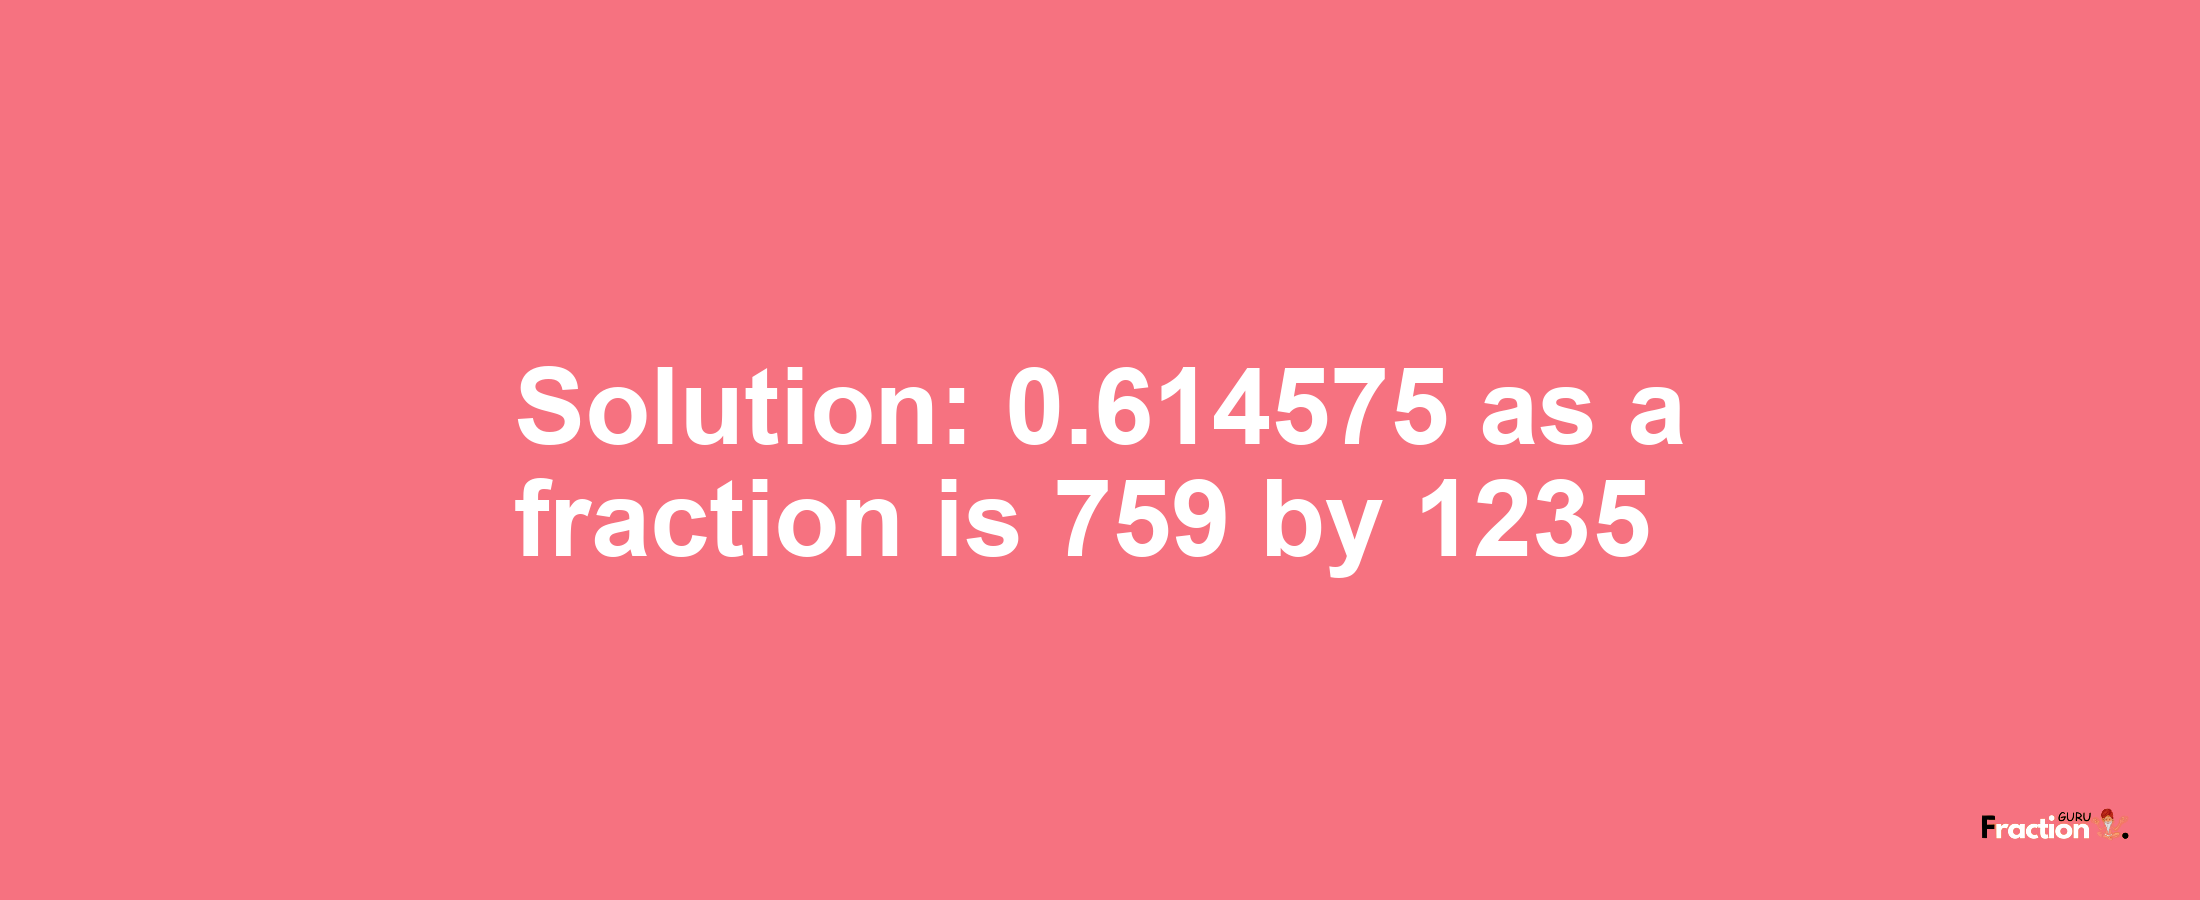 Solution:0.614575 as a fraction is 759/1235